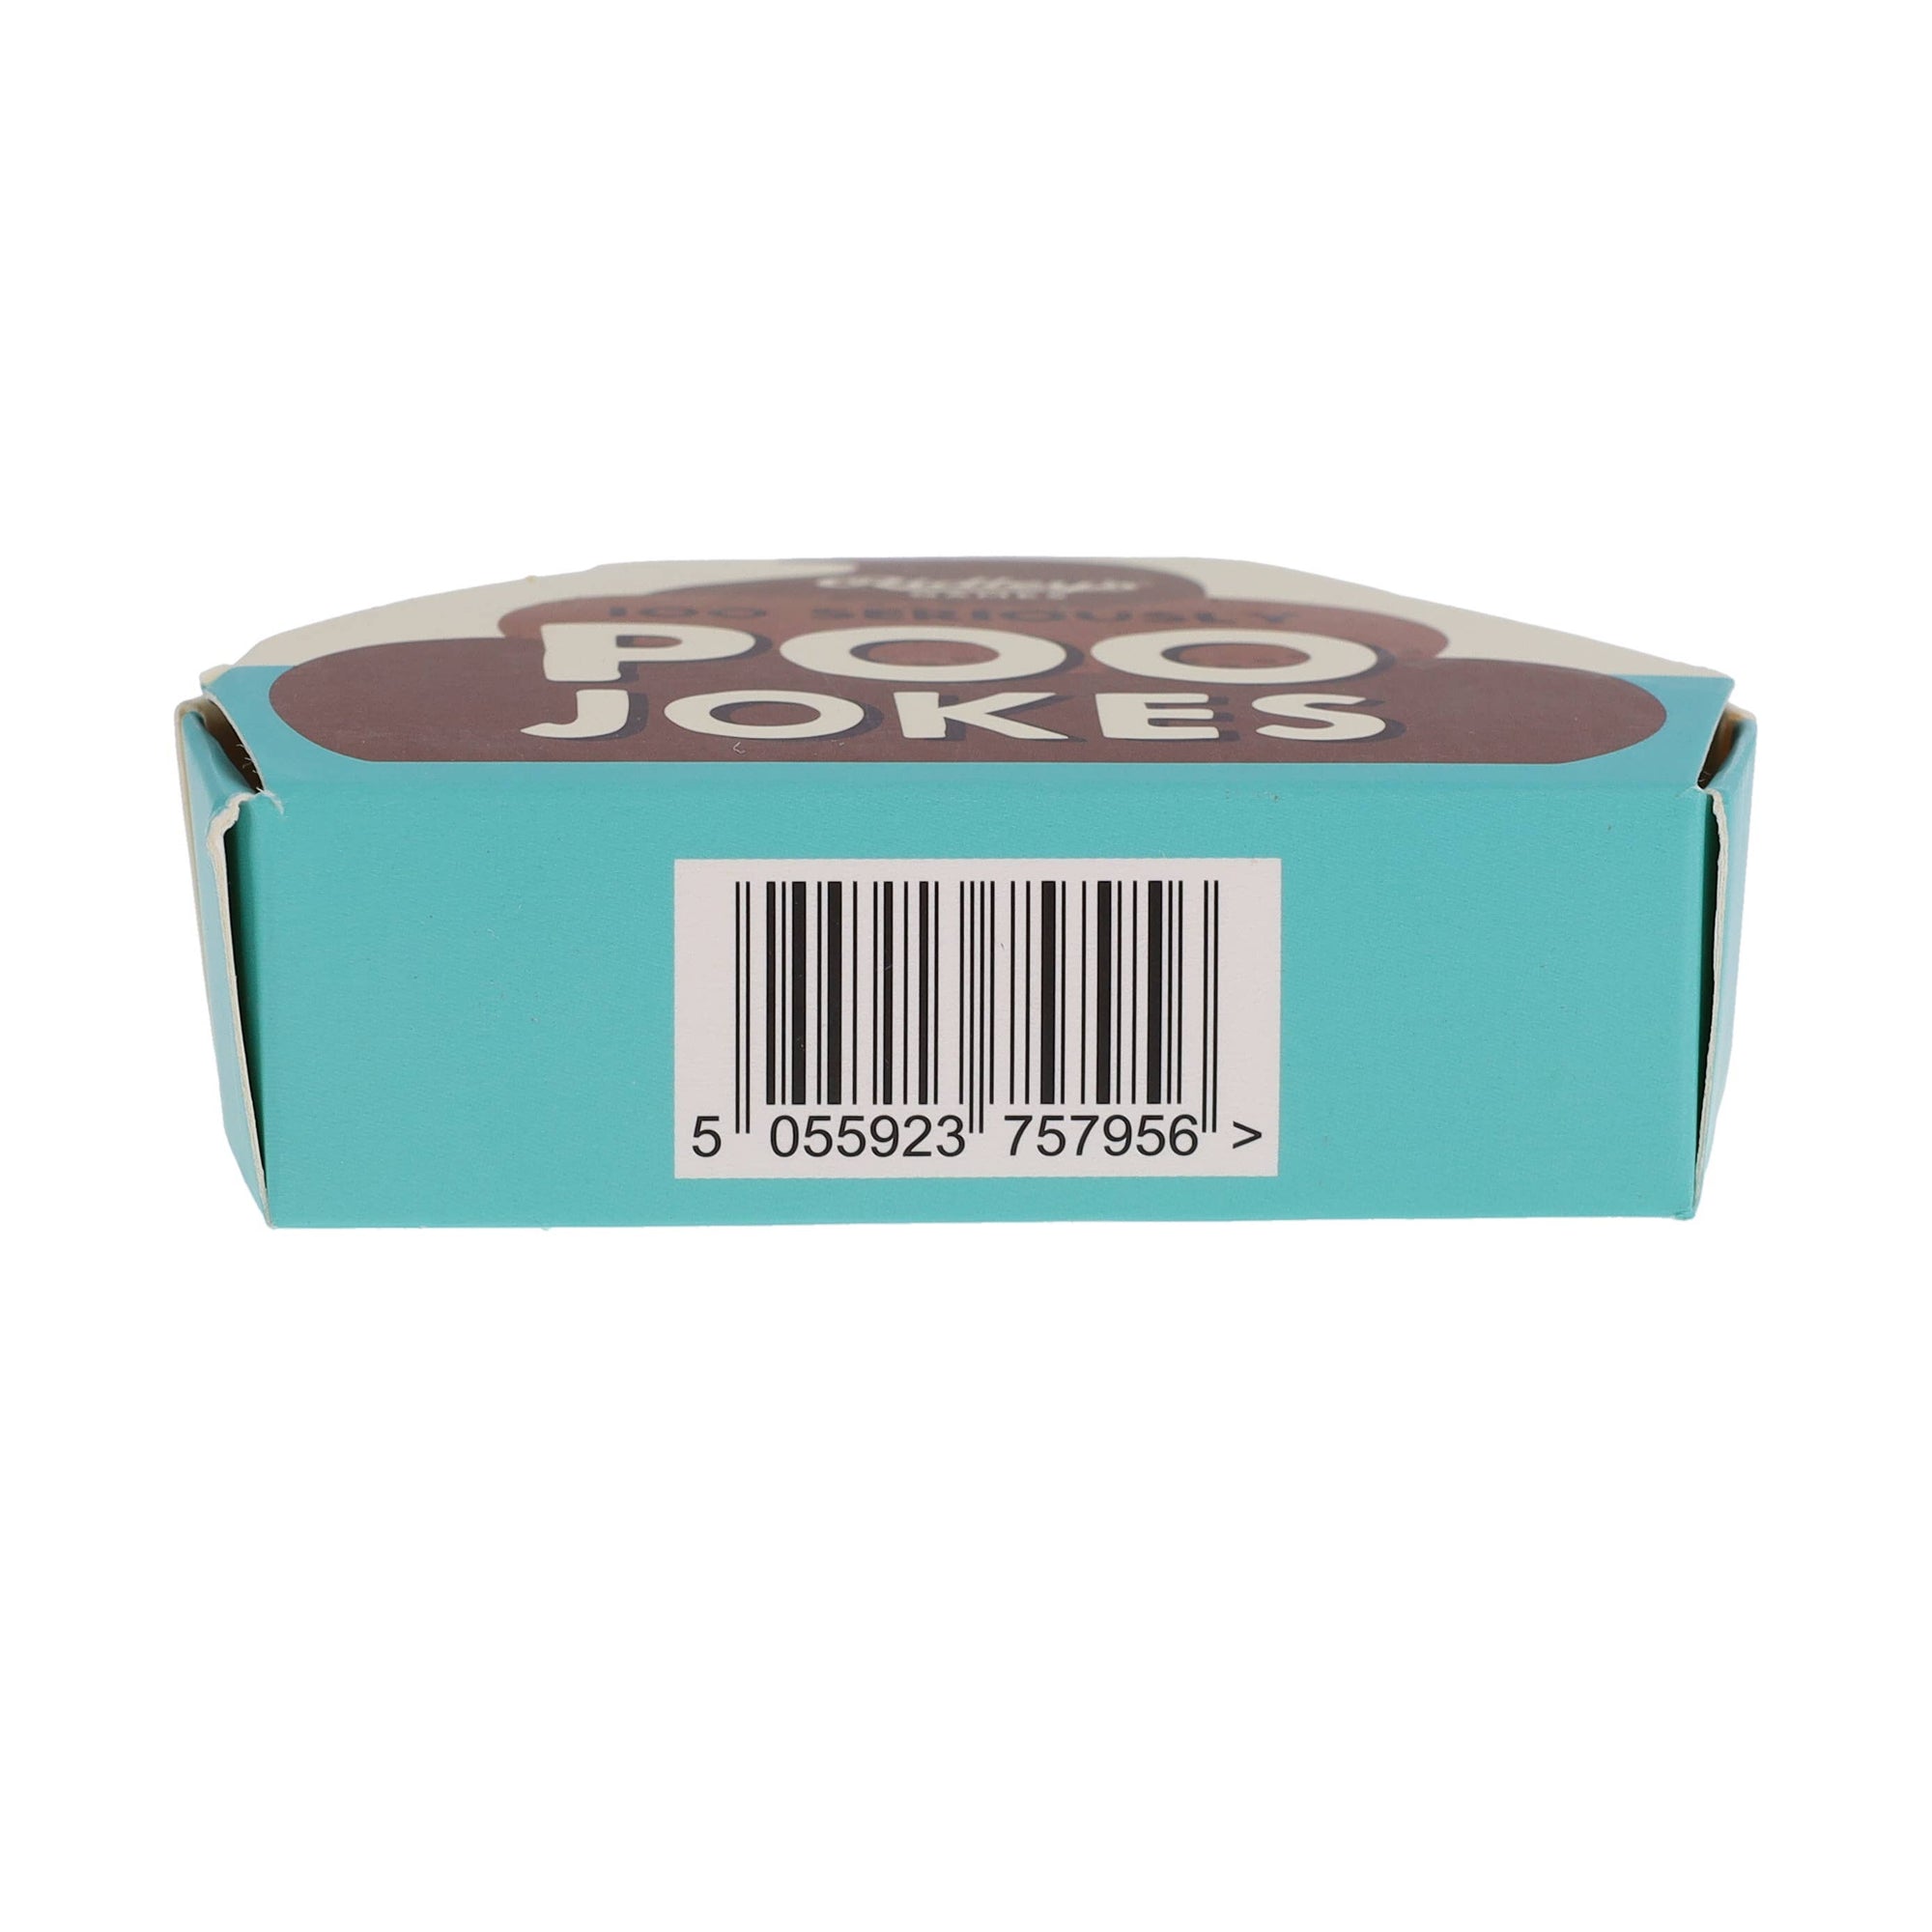 A blue box with a bar code on it, perfect for storing 100 Seriously Poo Jokes and turd-shaped cards from Ridley's Games.